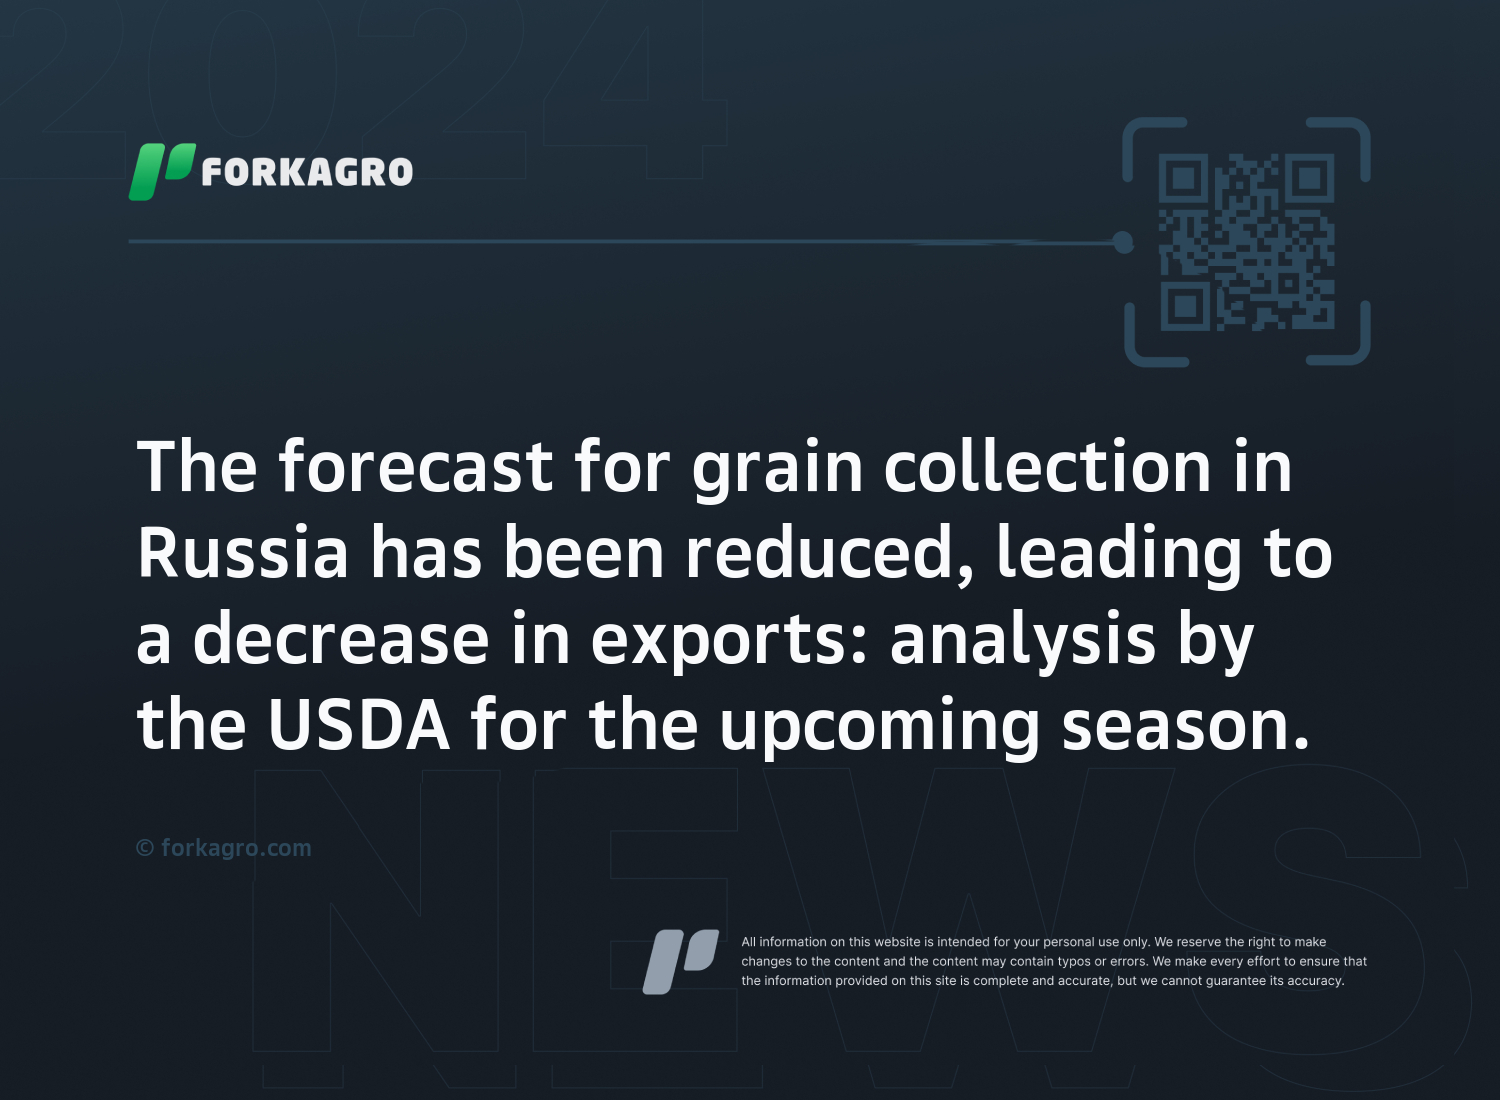 The forecast for grain collection in Russia has been reduced, leading to a decrease in exports: analysis by the USDA for the upcoming season.